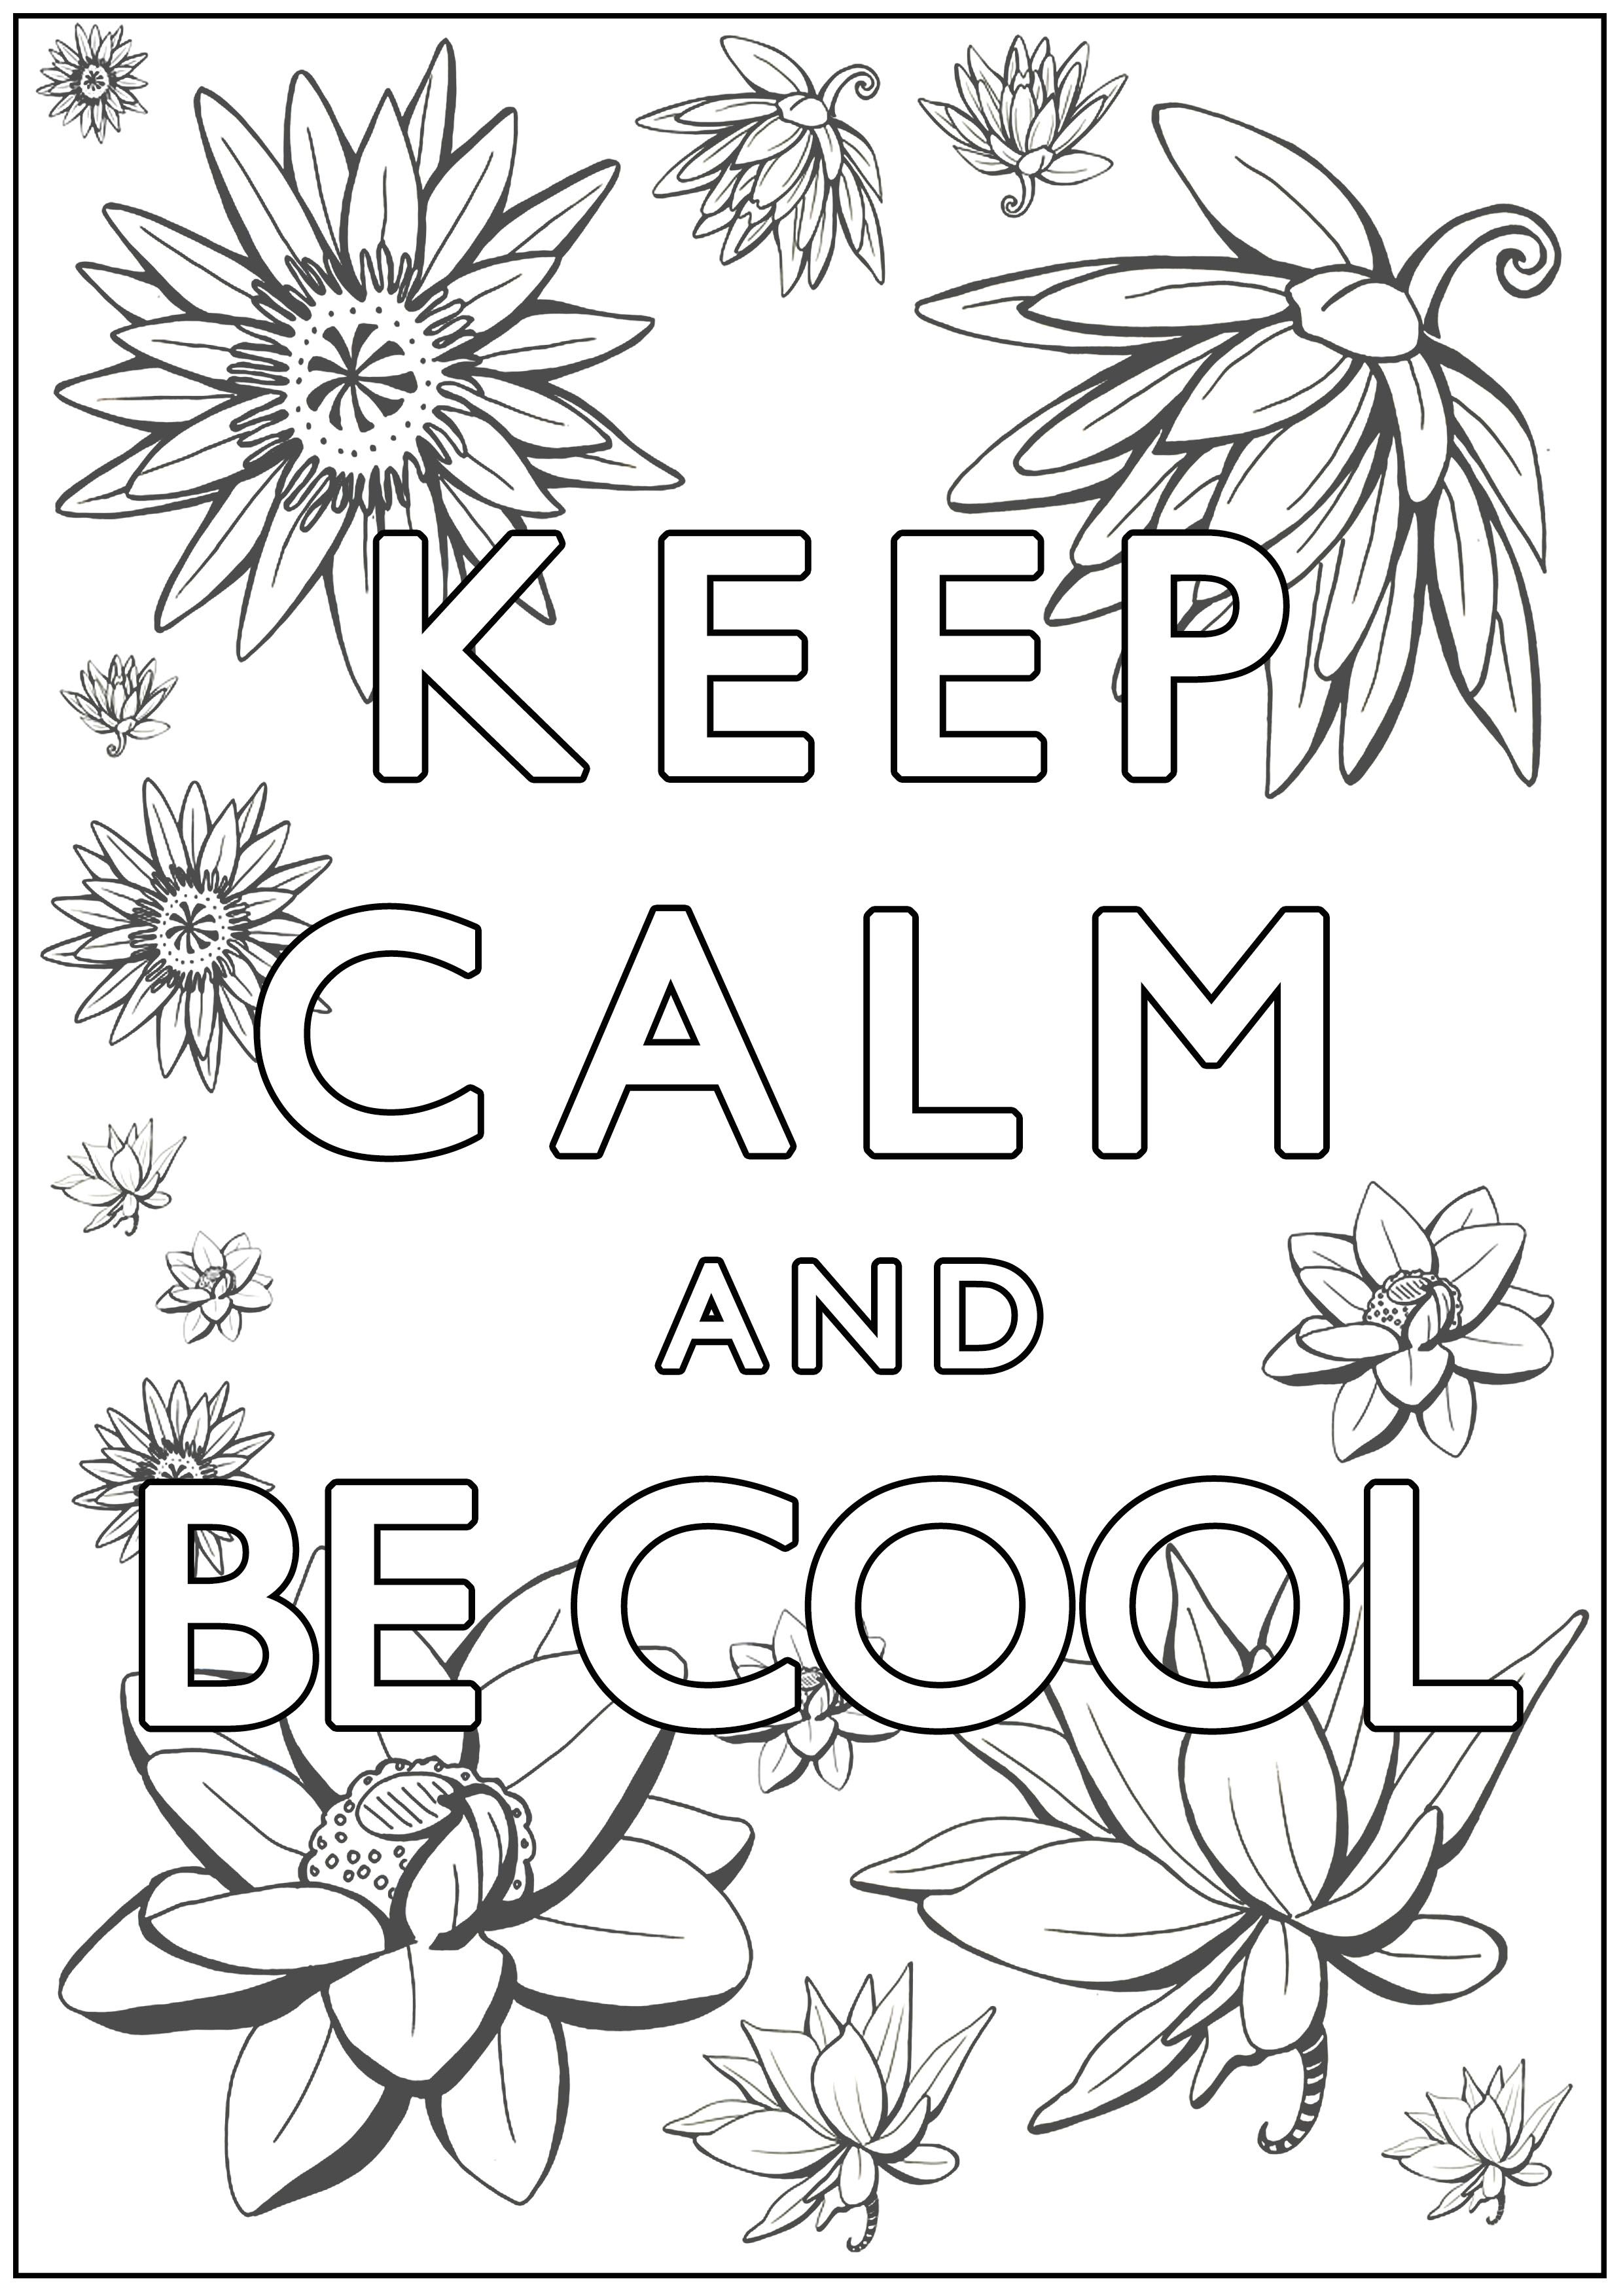 Keep Calm and Be Cool : Lotus flowers in background